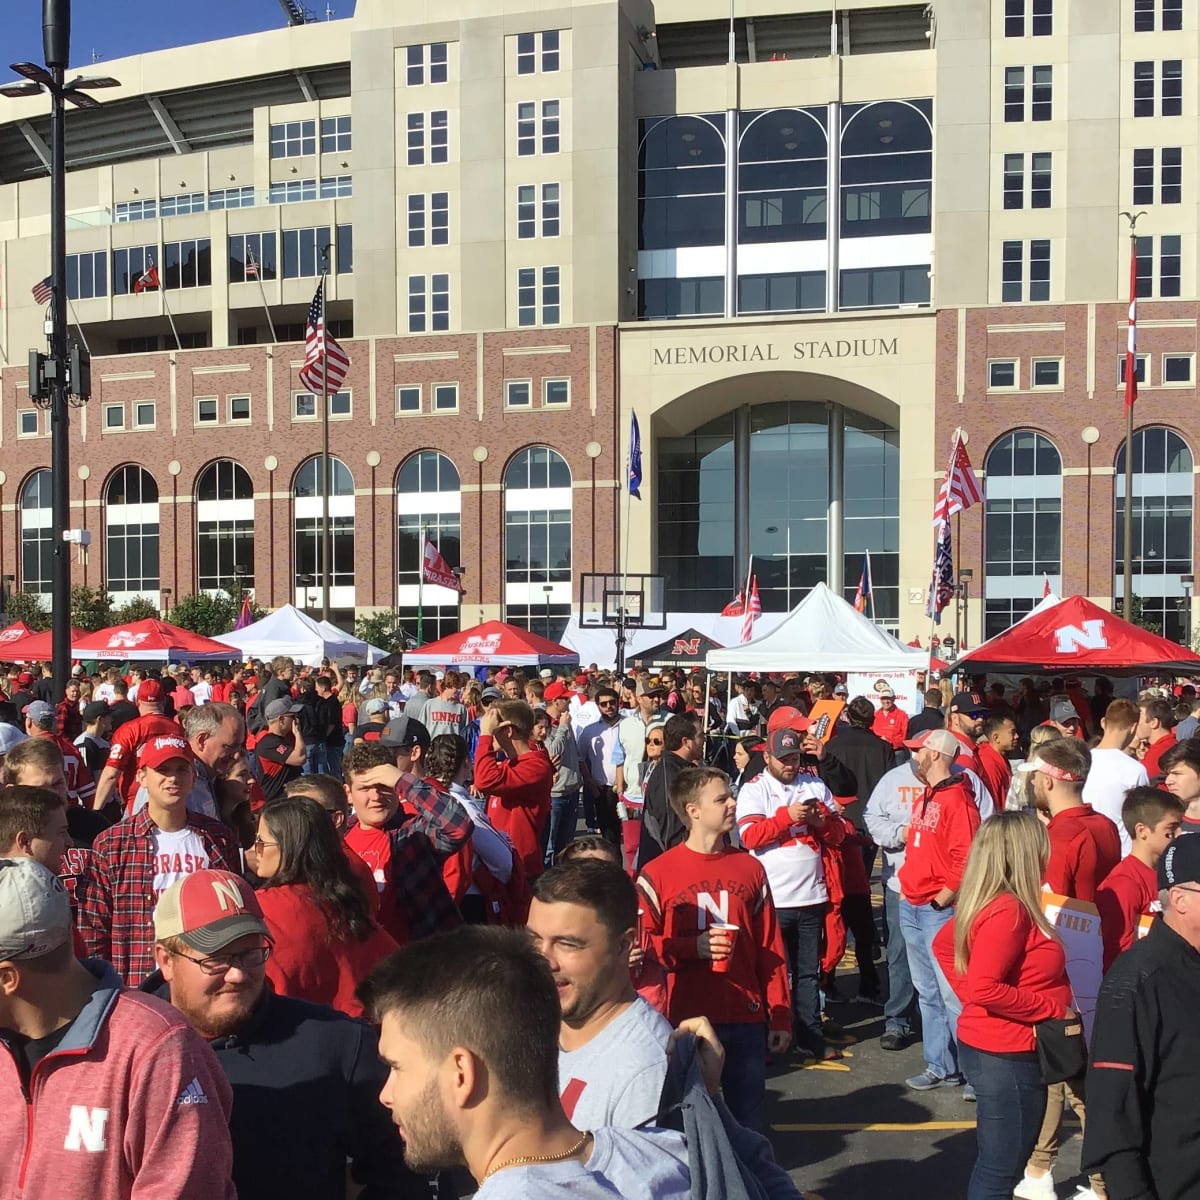 Check your bag before you pack into Memorial Stadium with 90,000 of your  closest friends